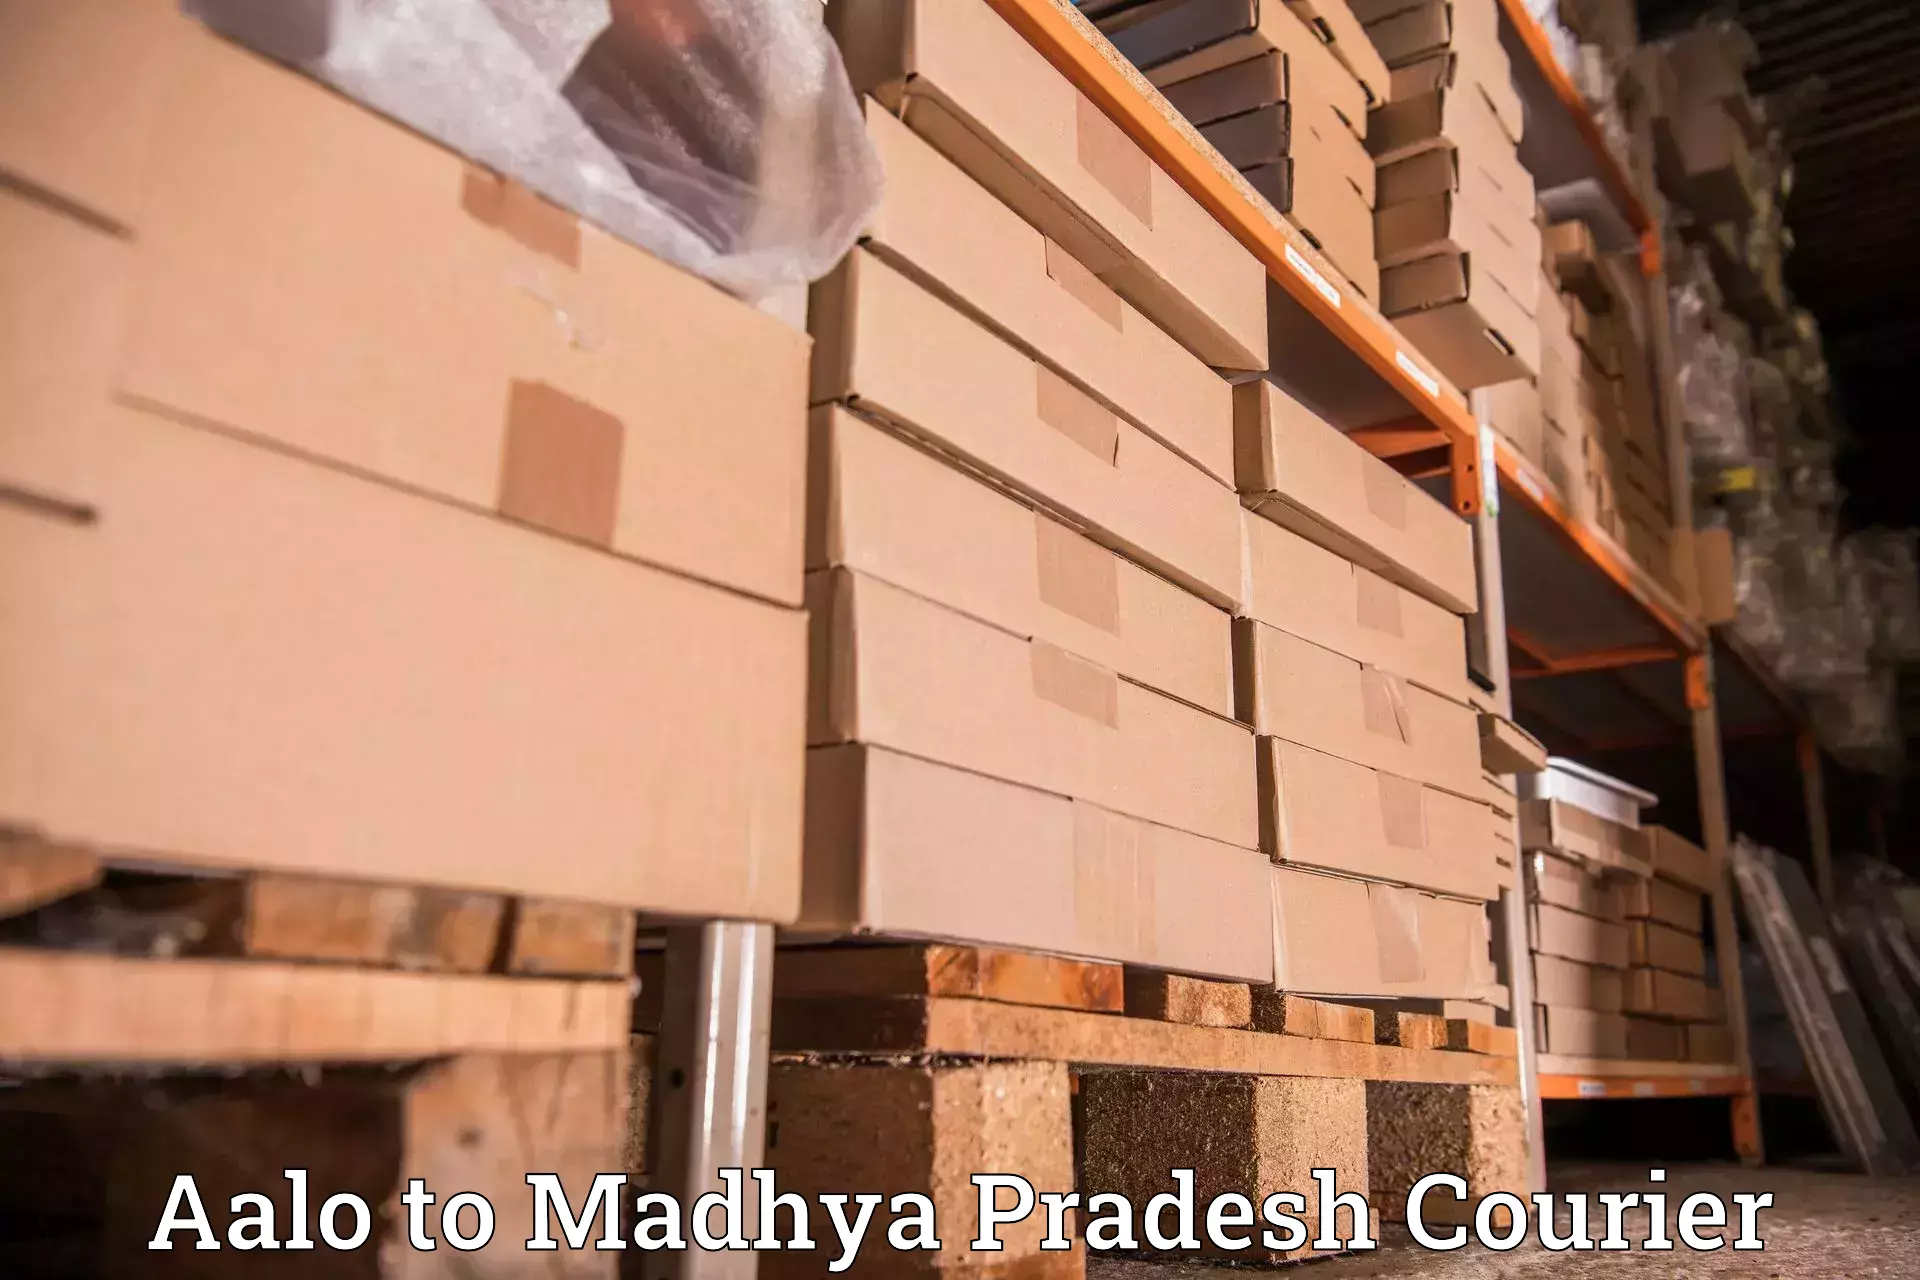 International courier networks Aalo to Madhya Pradesh